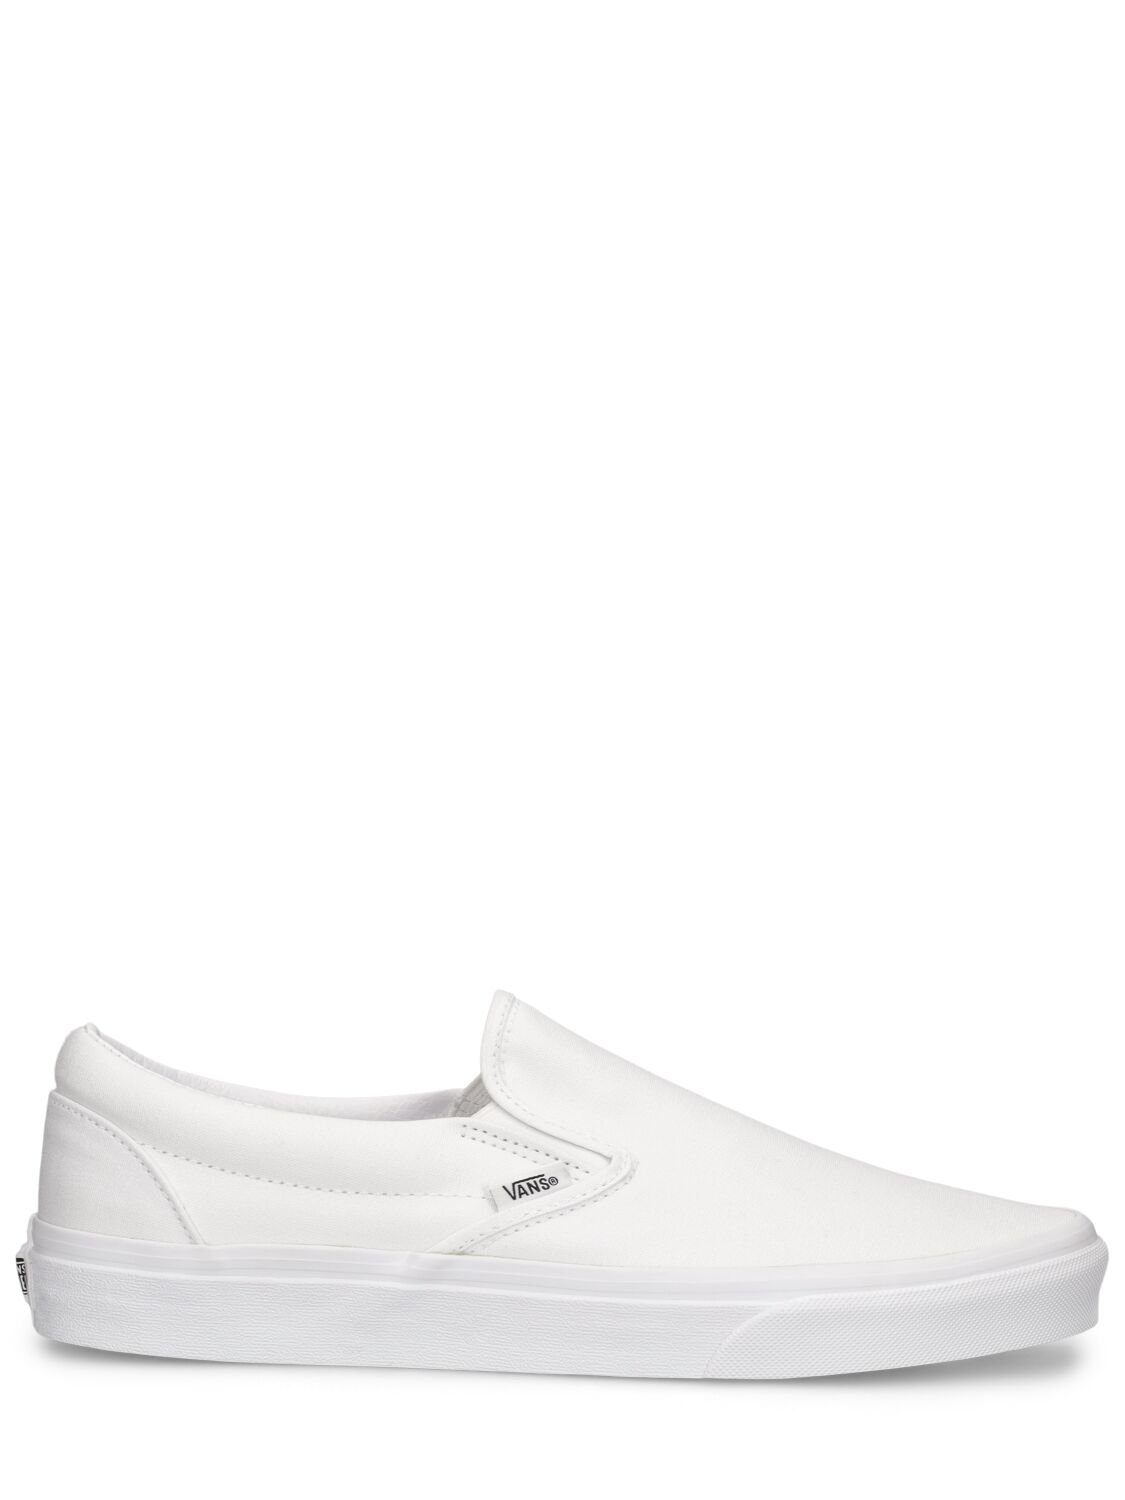 Image of Classic Slip-on Sneakers